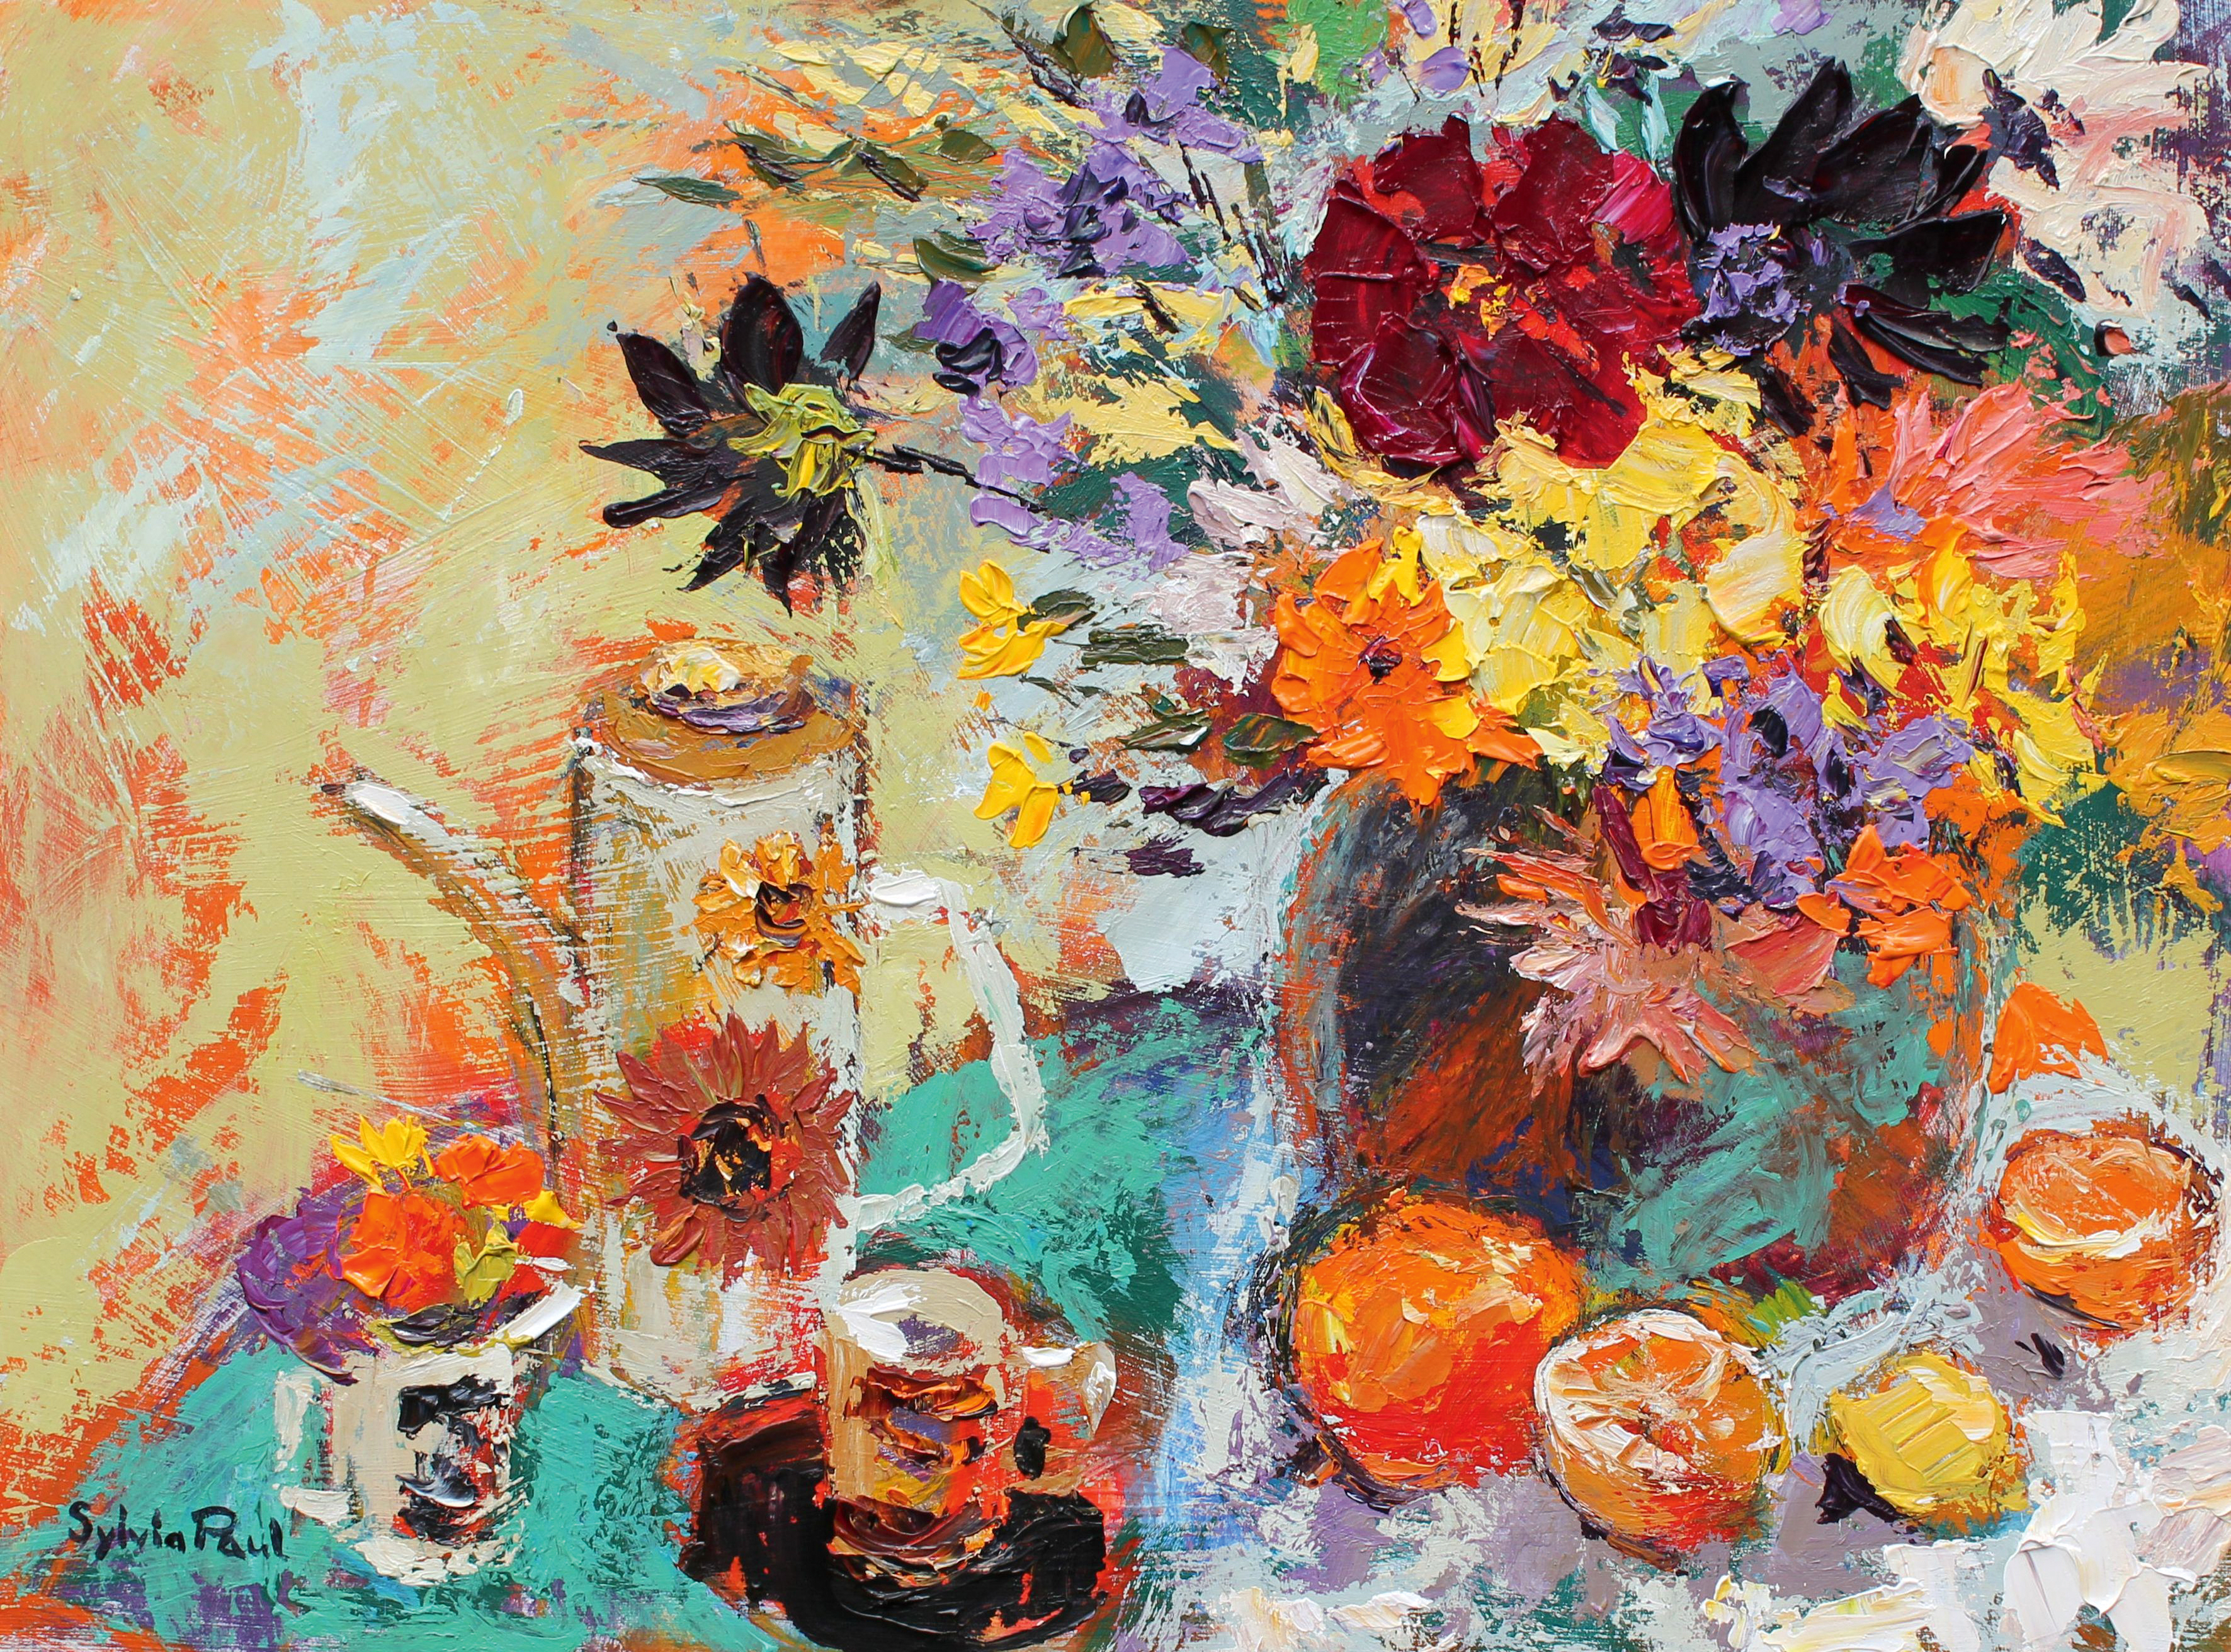 Vibrant still life of flowers, a jug, and fruit